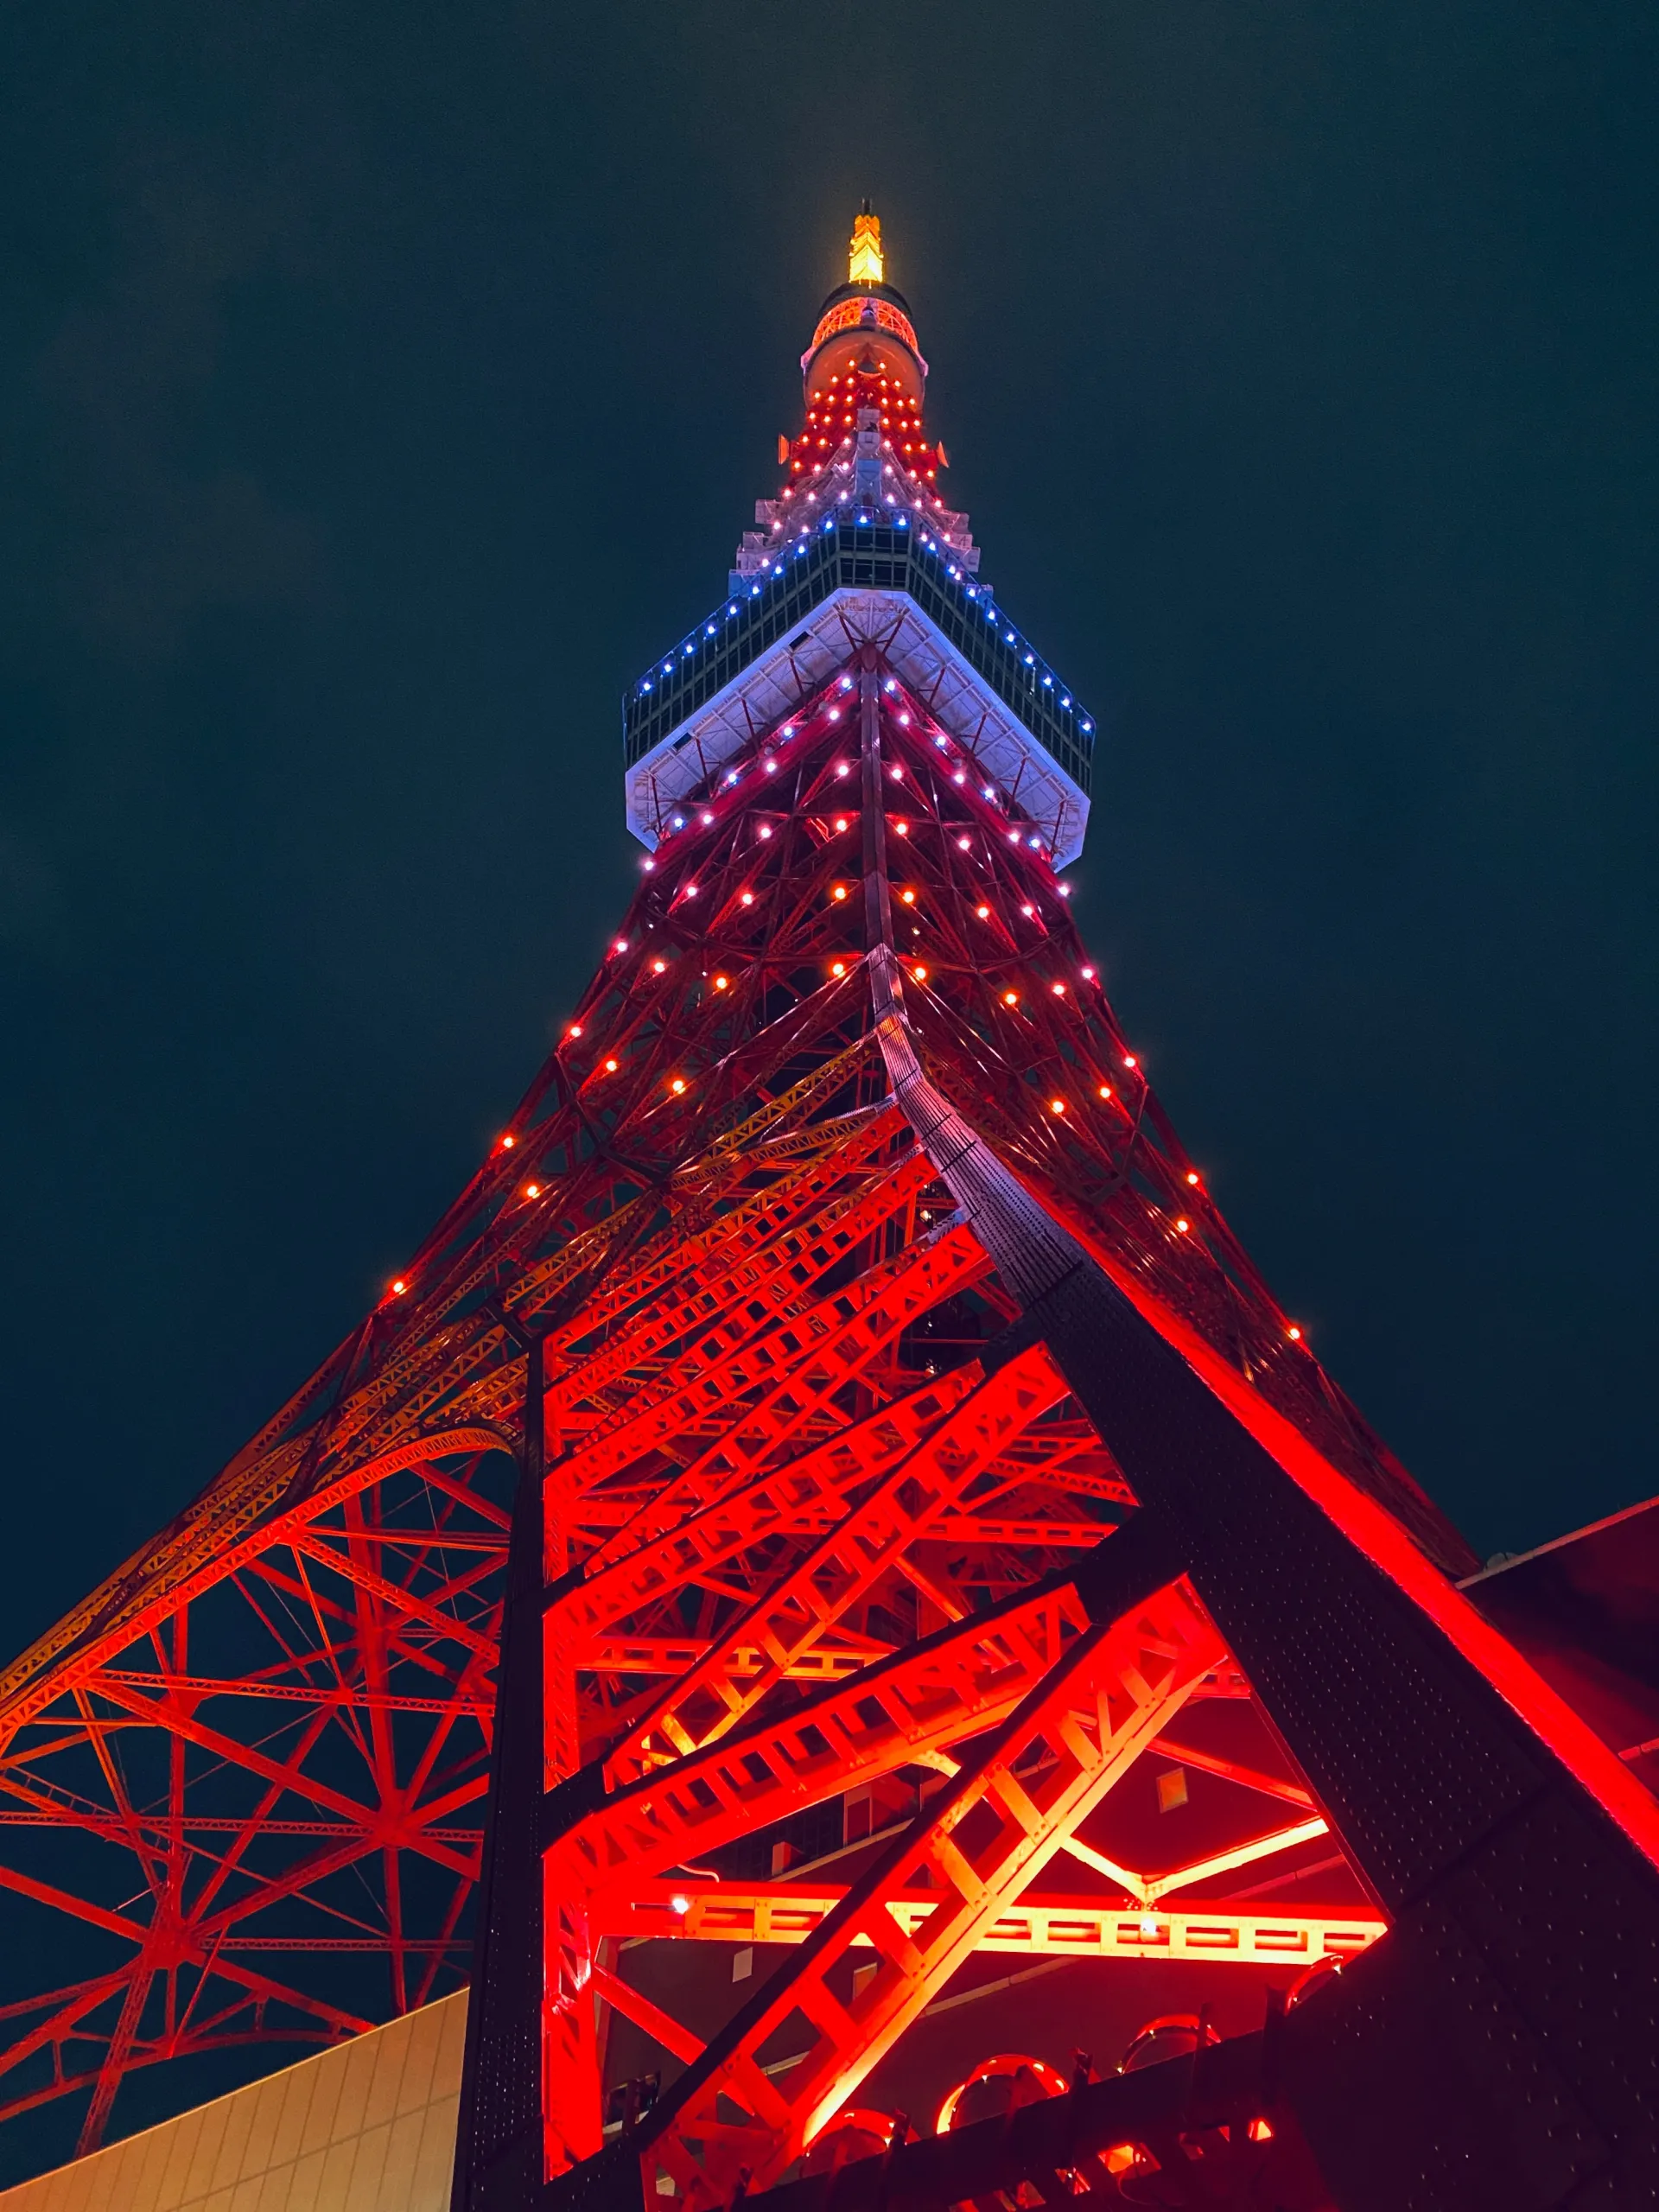 A photograph of Tokyo Tower from below